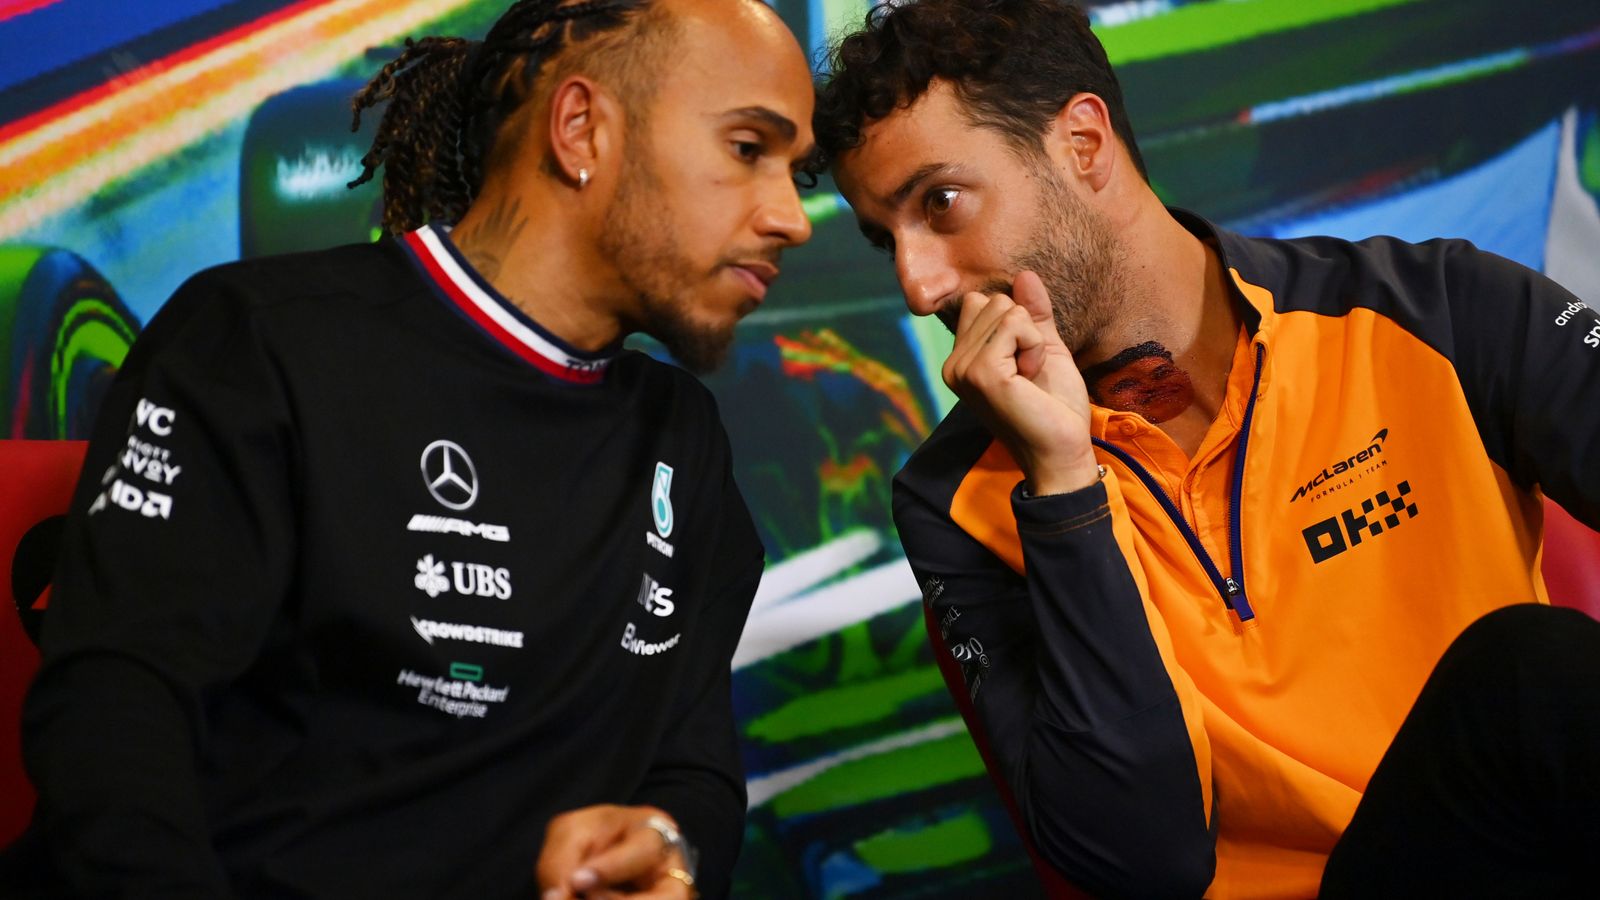 Lewis Hamilton says Mercedes role ‘not what’s best’ for Daniel Ricciardo and reiterates plans to continue in F1